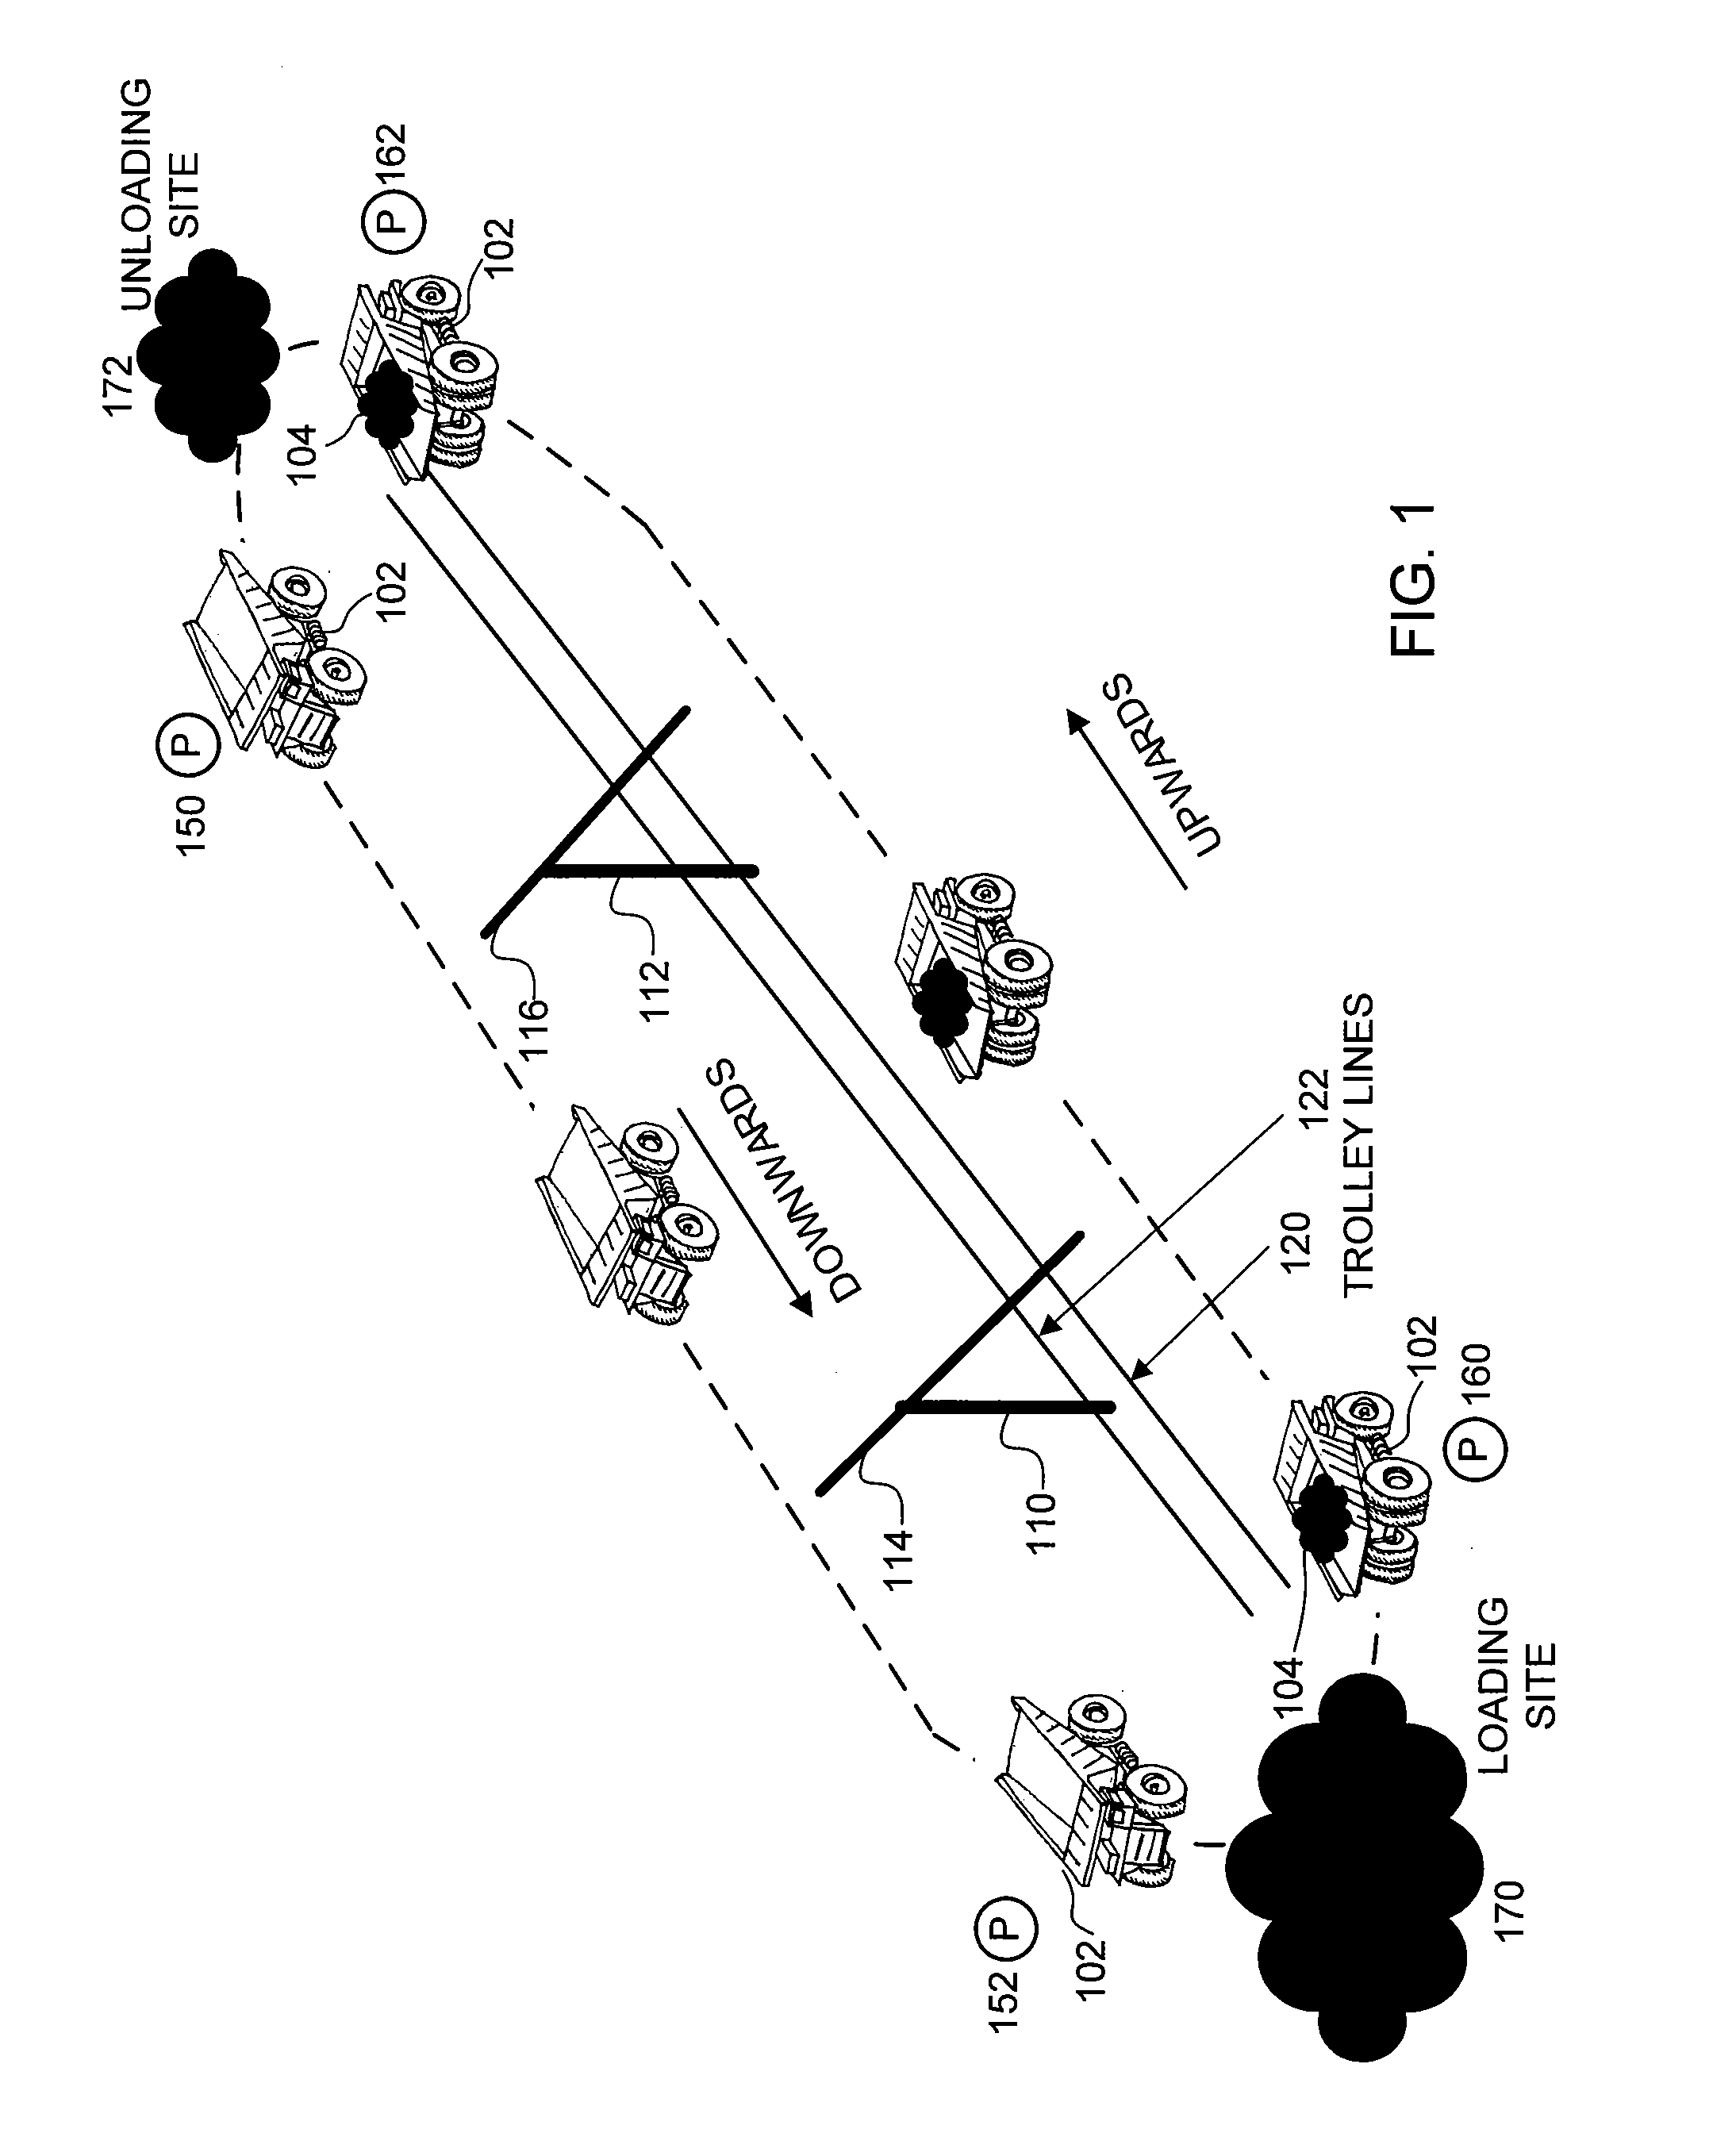 System and Method for Reinjection of Retard Energy in a Trolley-Based Electric Mining Haul Truck